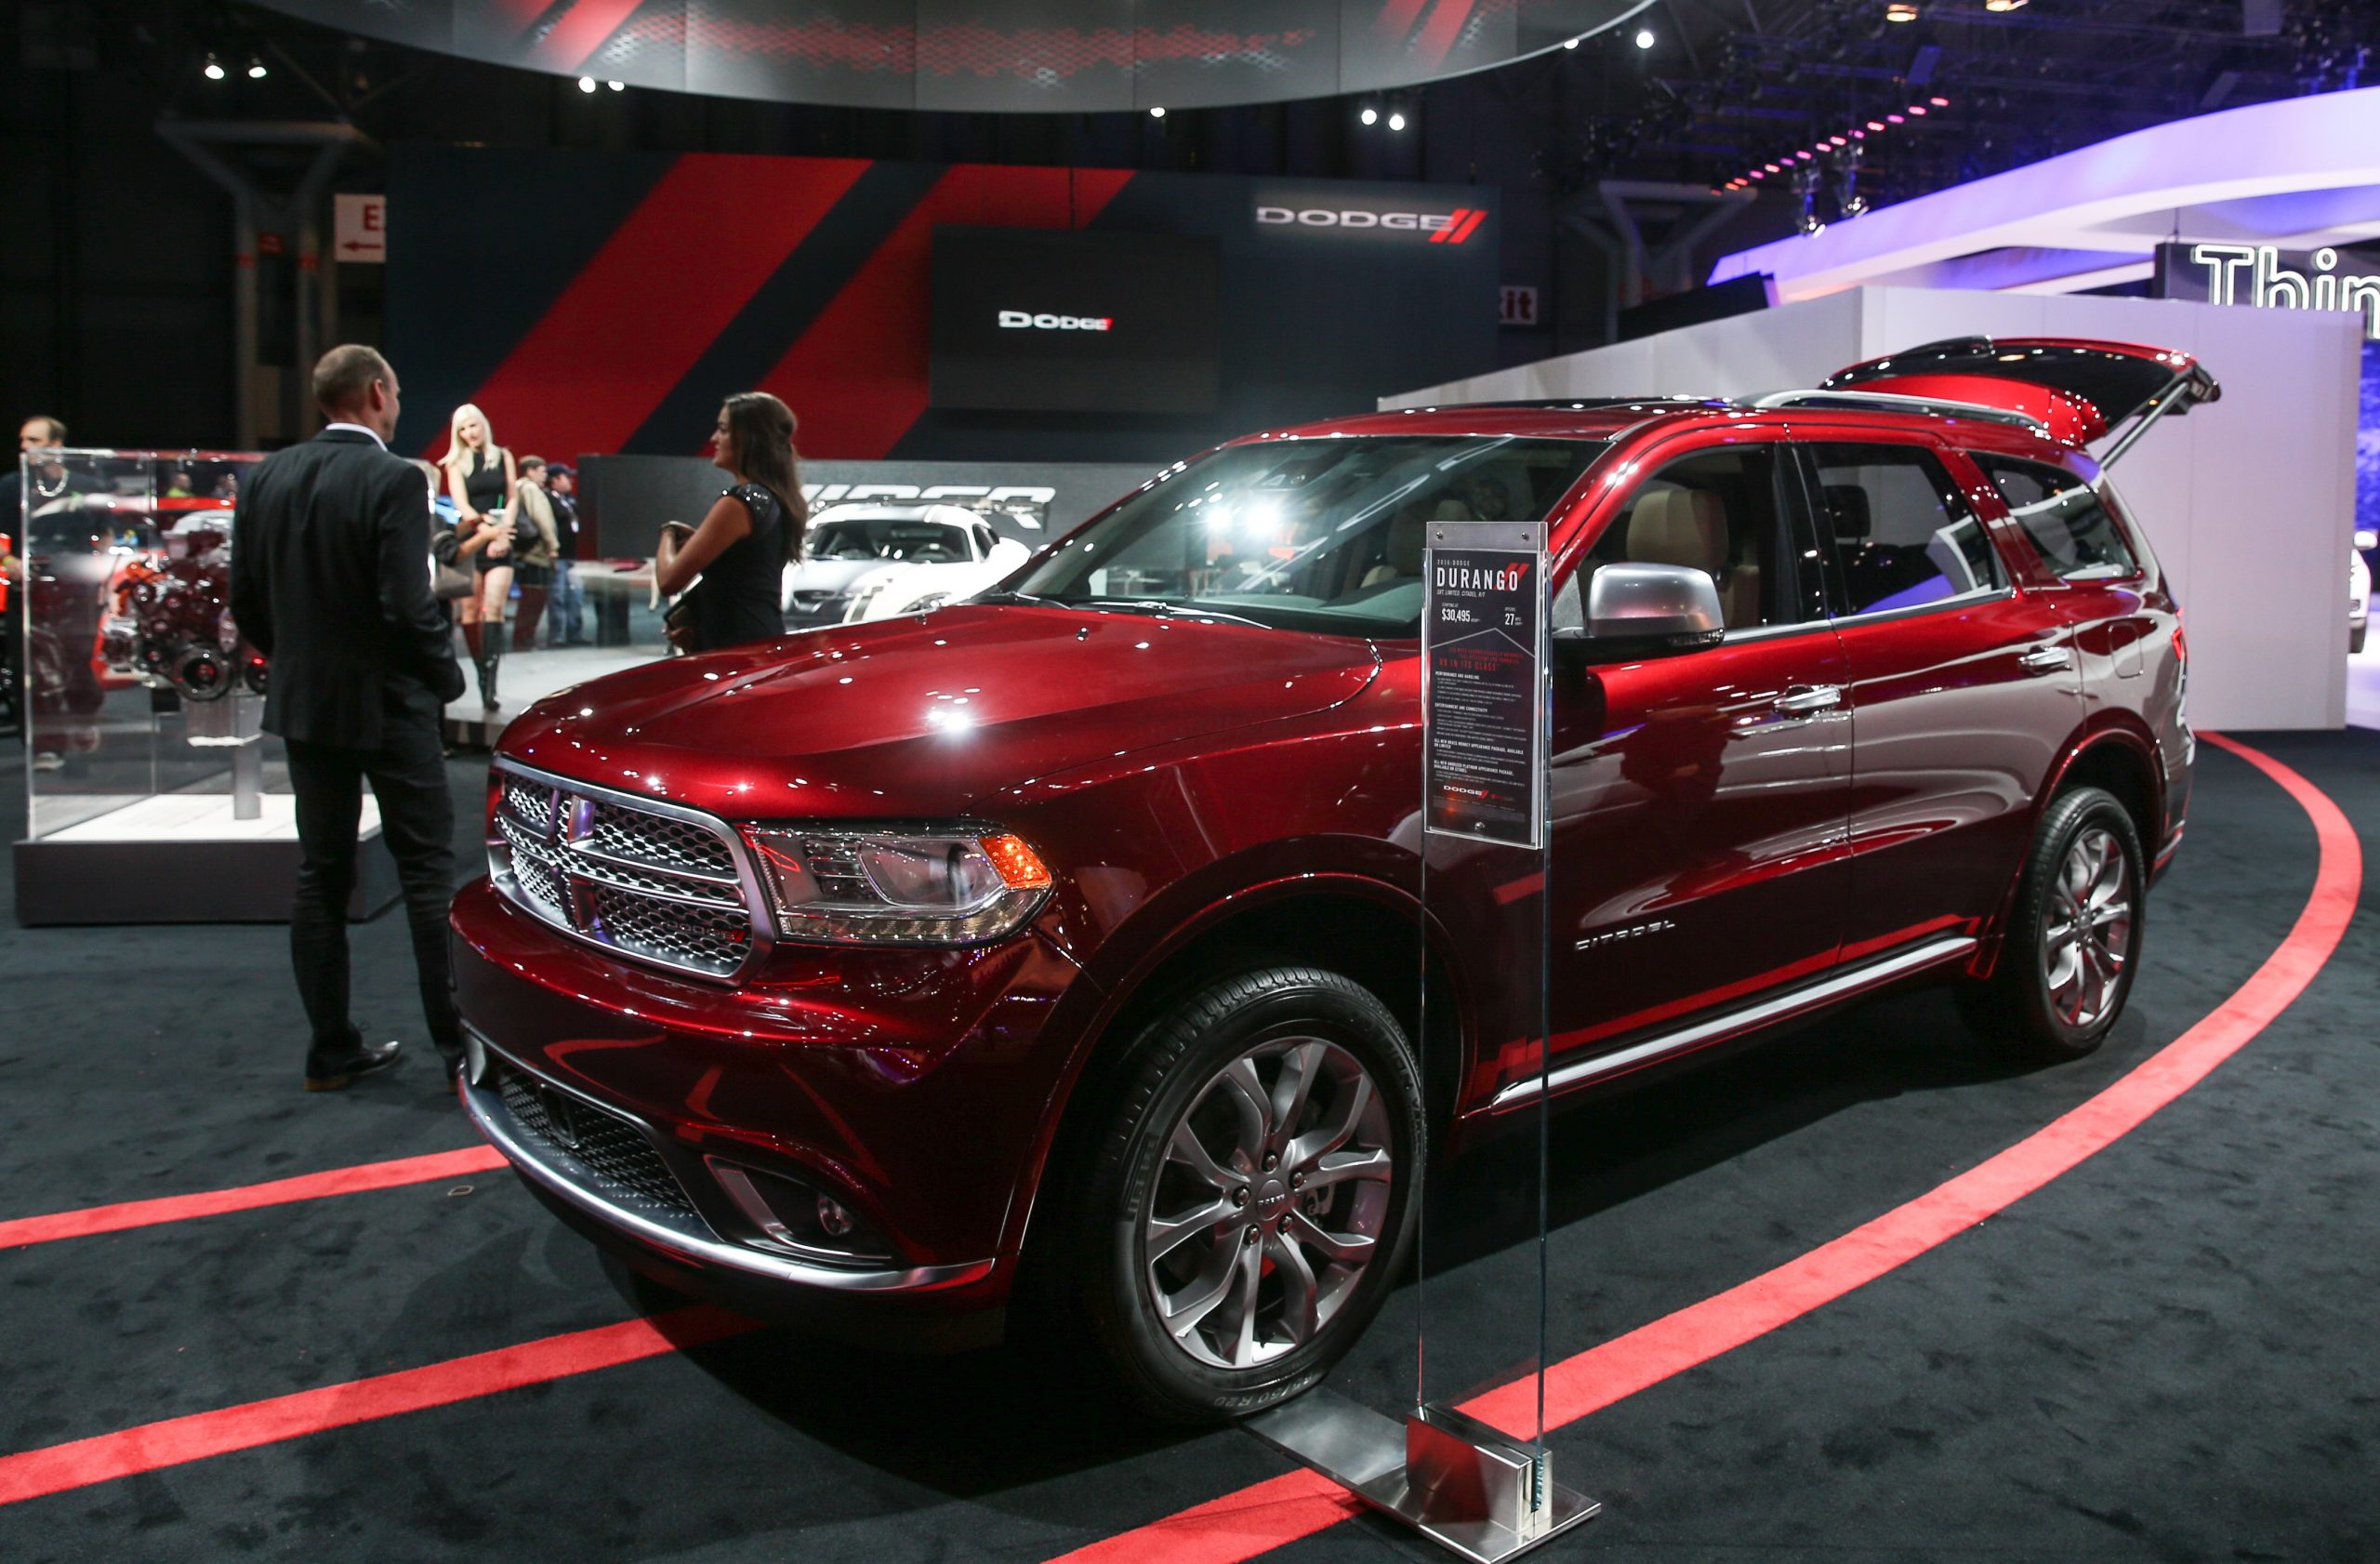 A Dodge Durango on display at an auto show